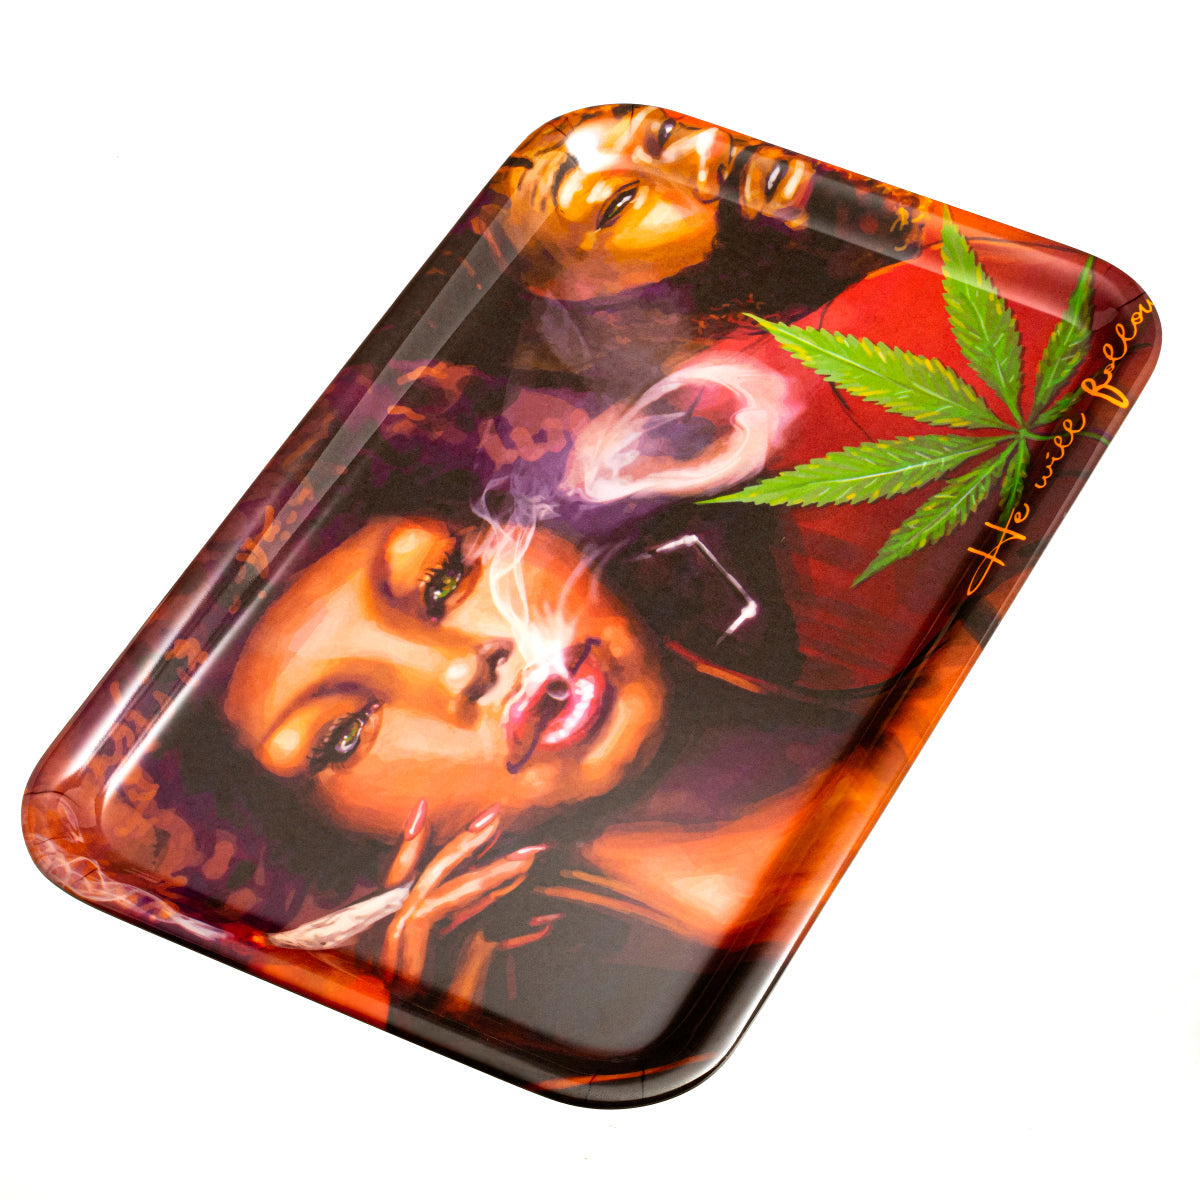 Rollin Budz He Will Follow Rolling Tray - (1 Count)-Rolling Trays and Accessories